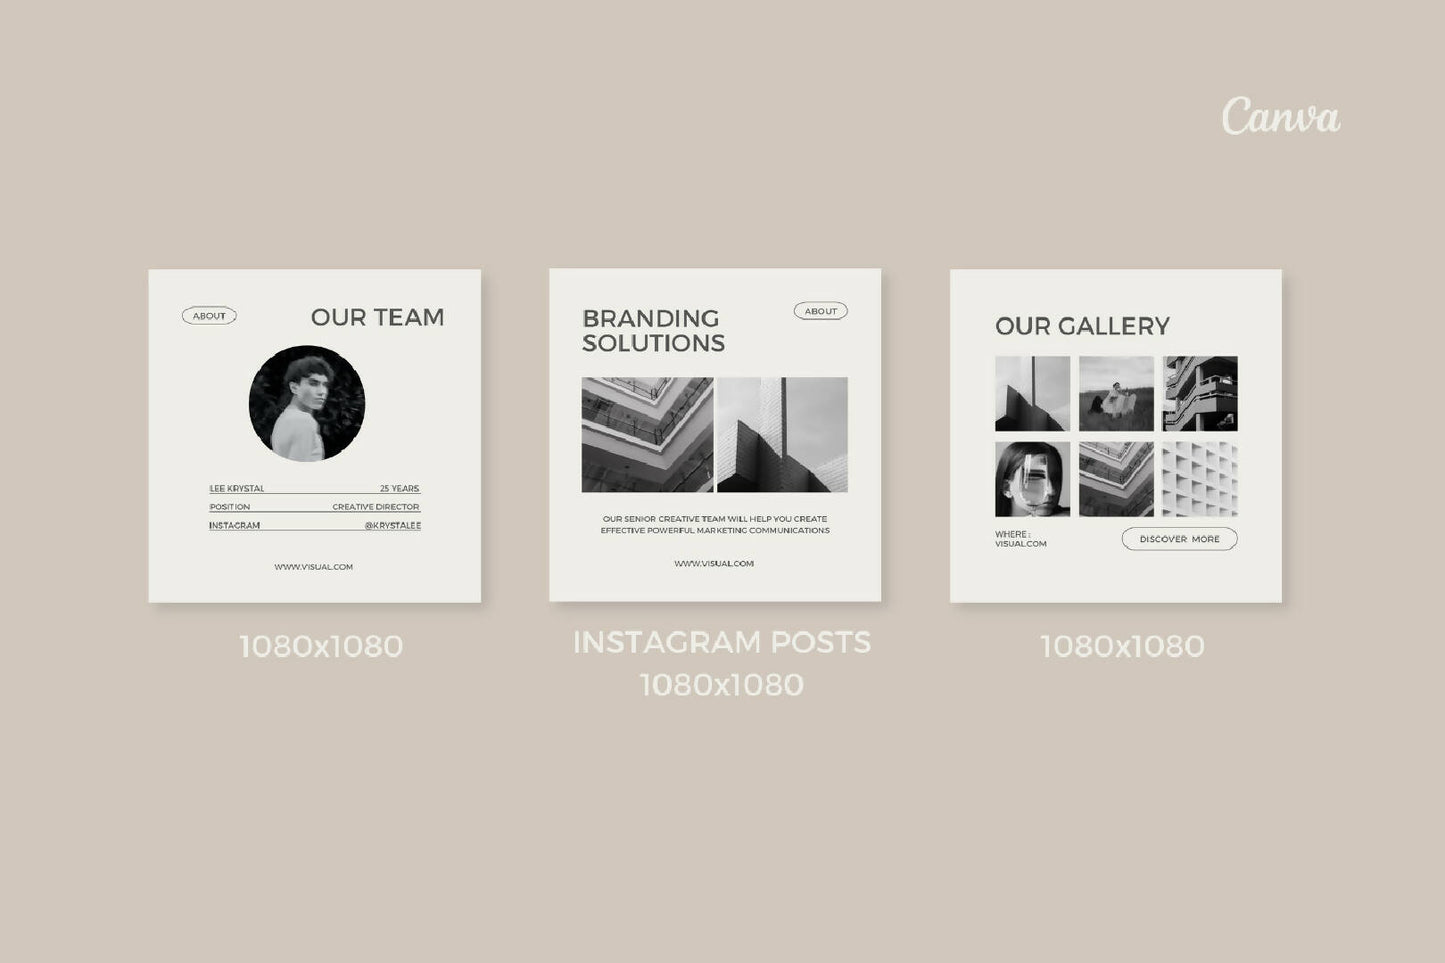 Timeless Template for Instagram - Editable with Canva